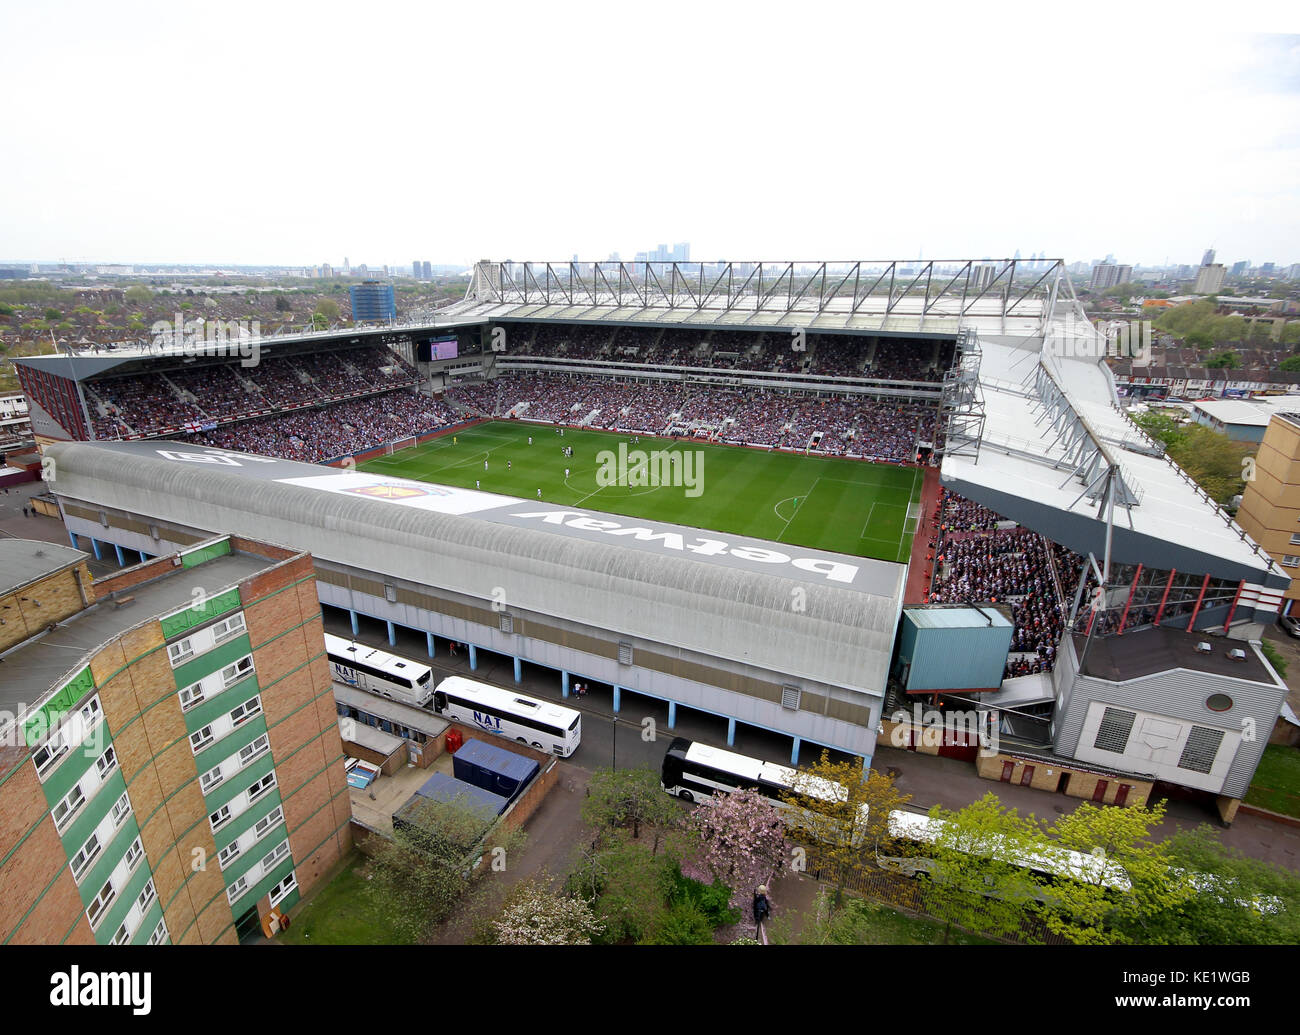 7 May 2016.  General views of the Boleyn Ground, Upton Park, home of West Ham United Football Club during the final Saturday home game v Swansea City. Stock Photo